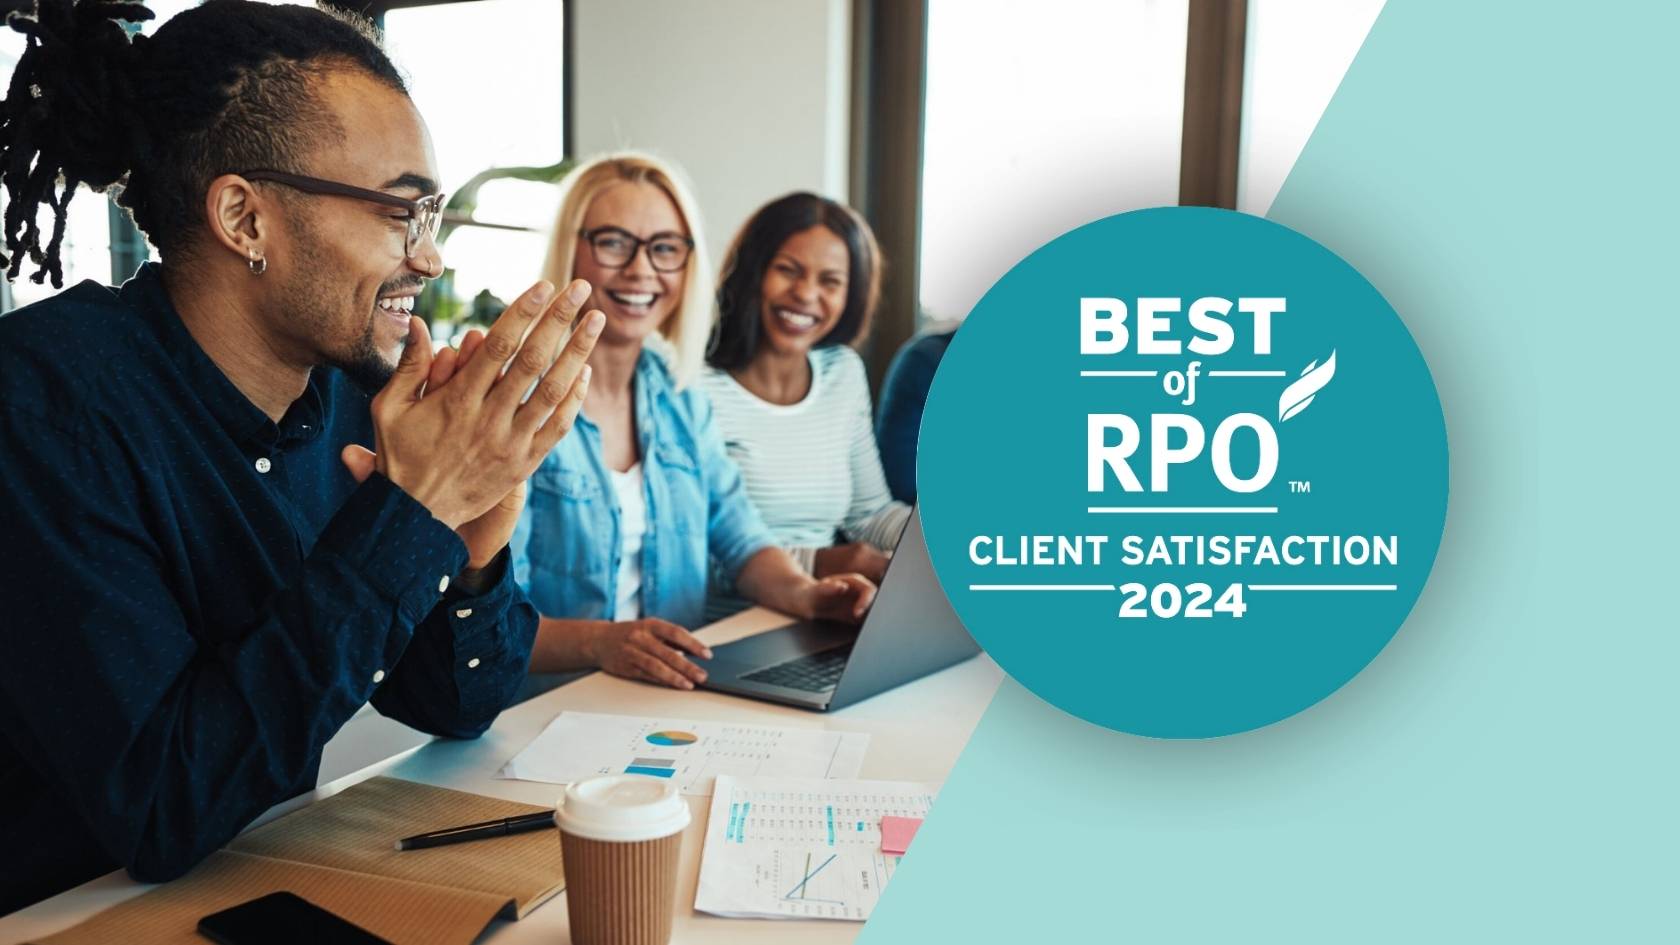 Hueman wins Clearlyrated's Best of RPO 2024 Diamond Award for the fifth consecutive year in recognition for service excellence.